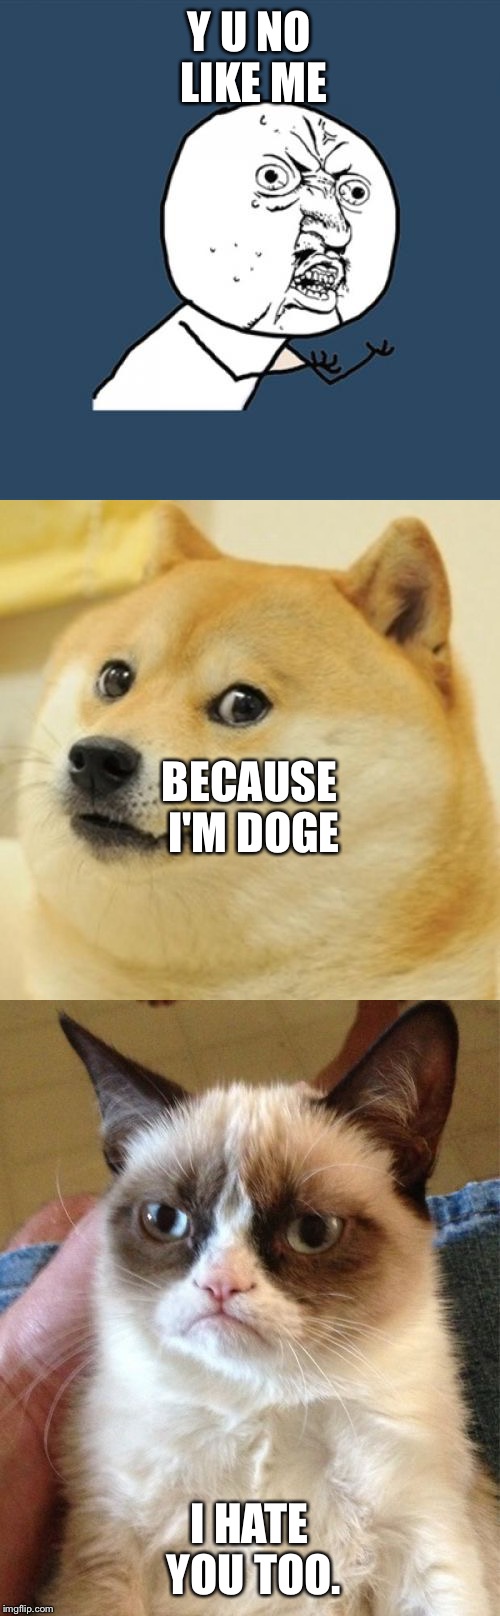 No love. | Y U NO LIKE ME; BECAUSE I'M DOGE; I HATE YOU TOO. | image tagged in grump cat meme,asian doge,funny memes,y u no | made w/ Imgflip meme maker